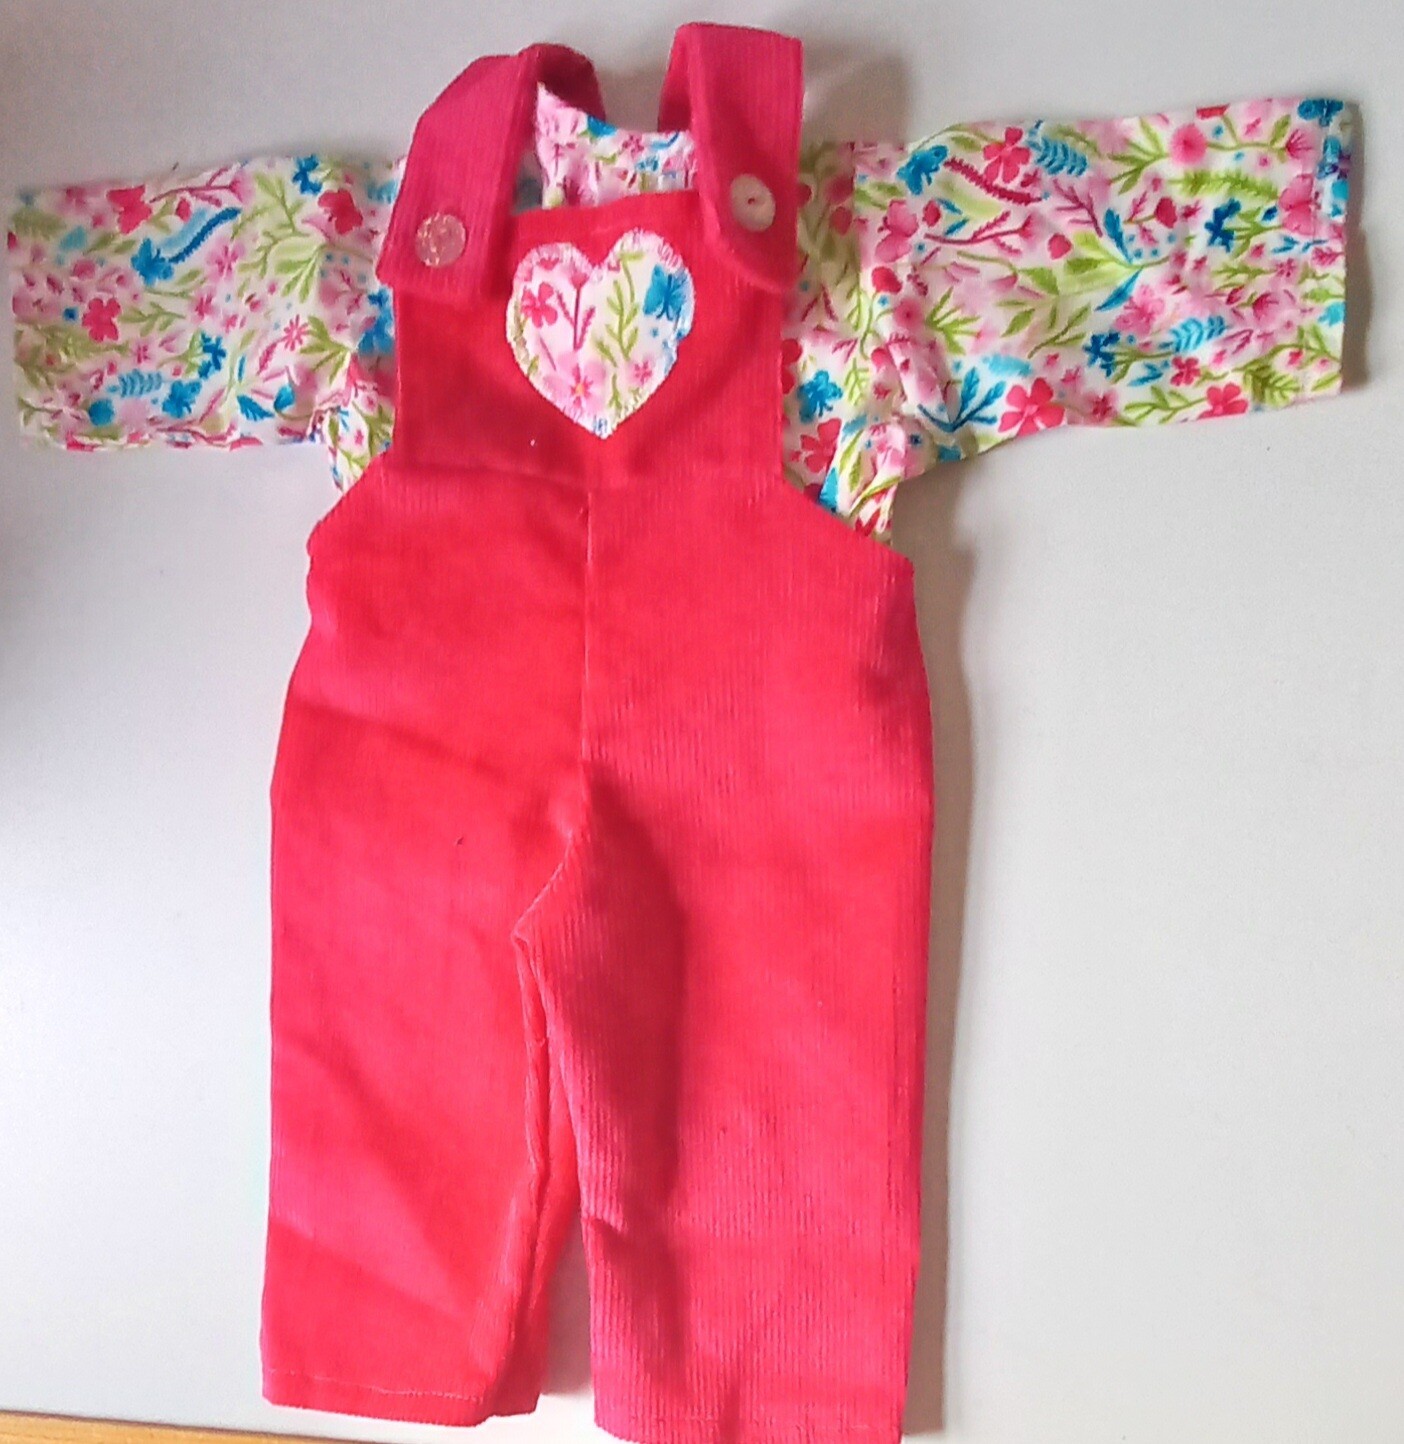 Outfit: Cerise pink corduroy dungarees and floral top